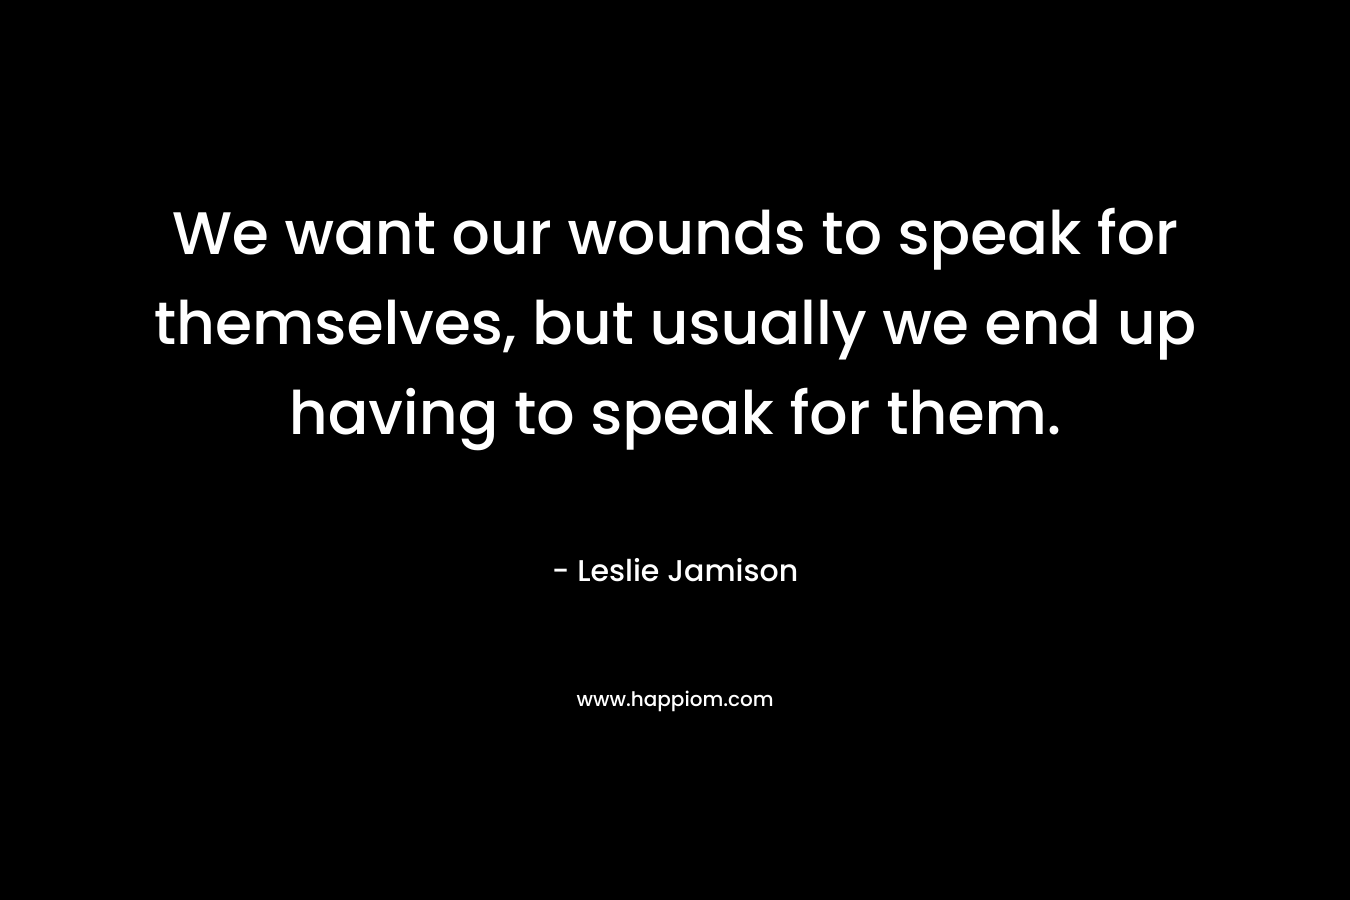 We want our wounds to speak for themselves, but usually we end up having to speak for them.